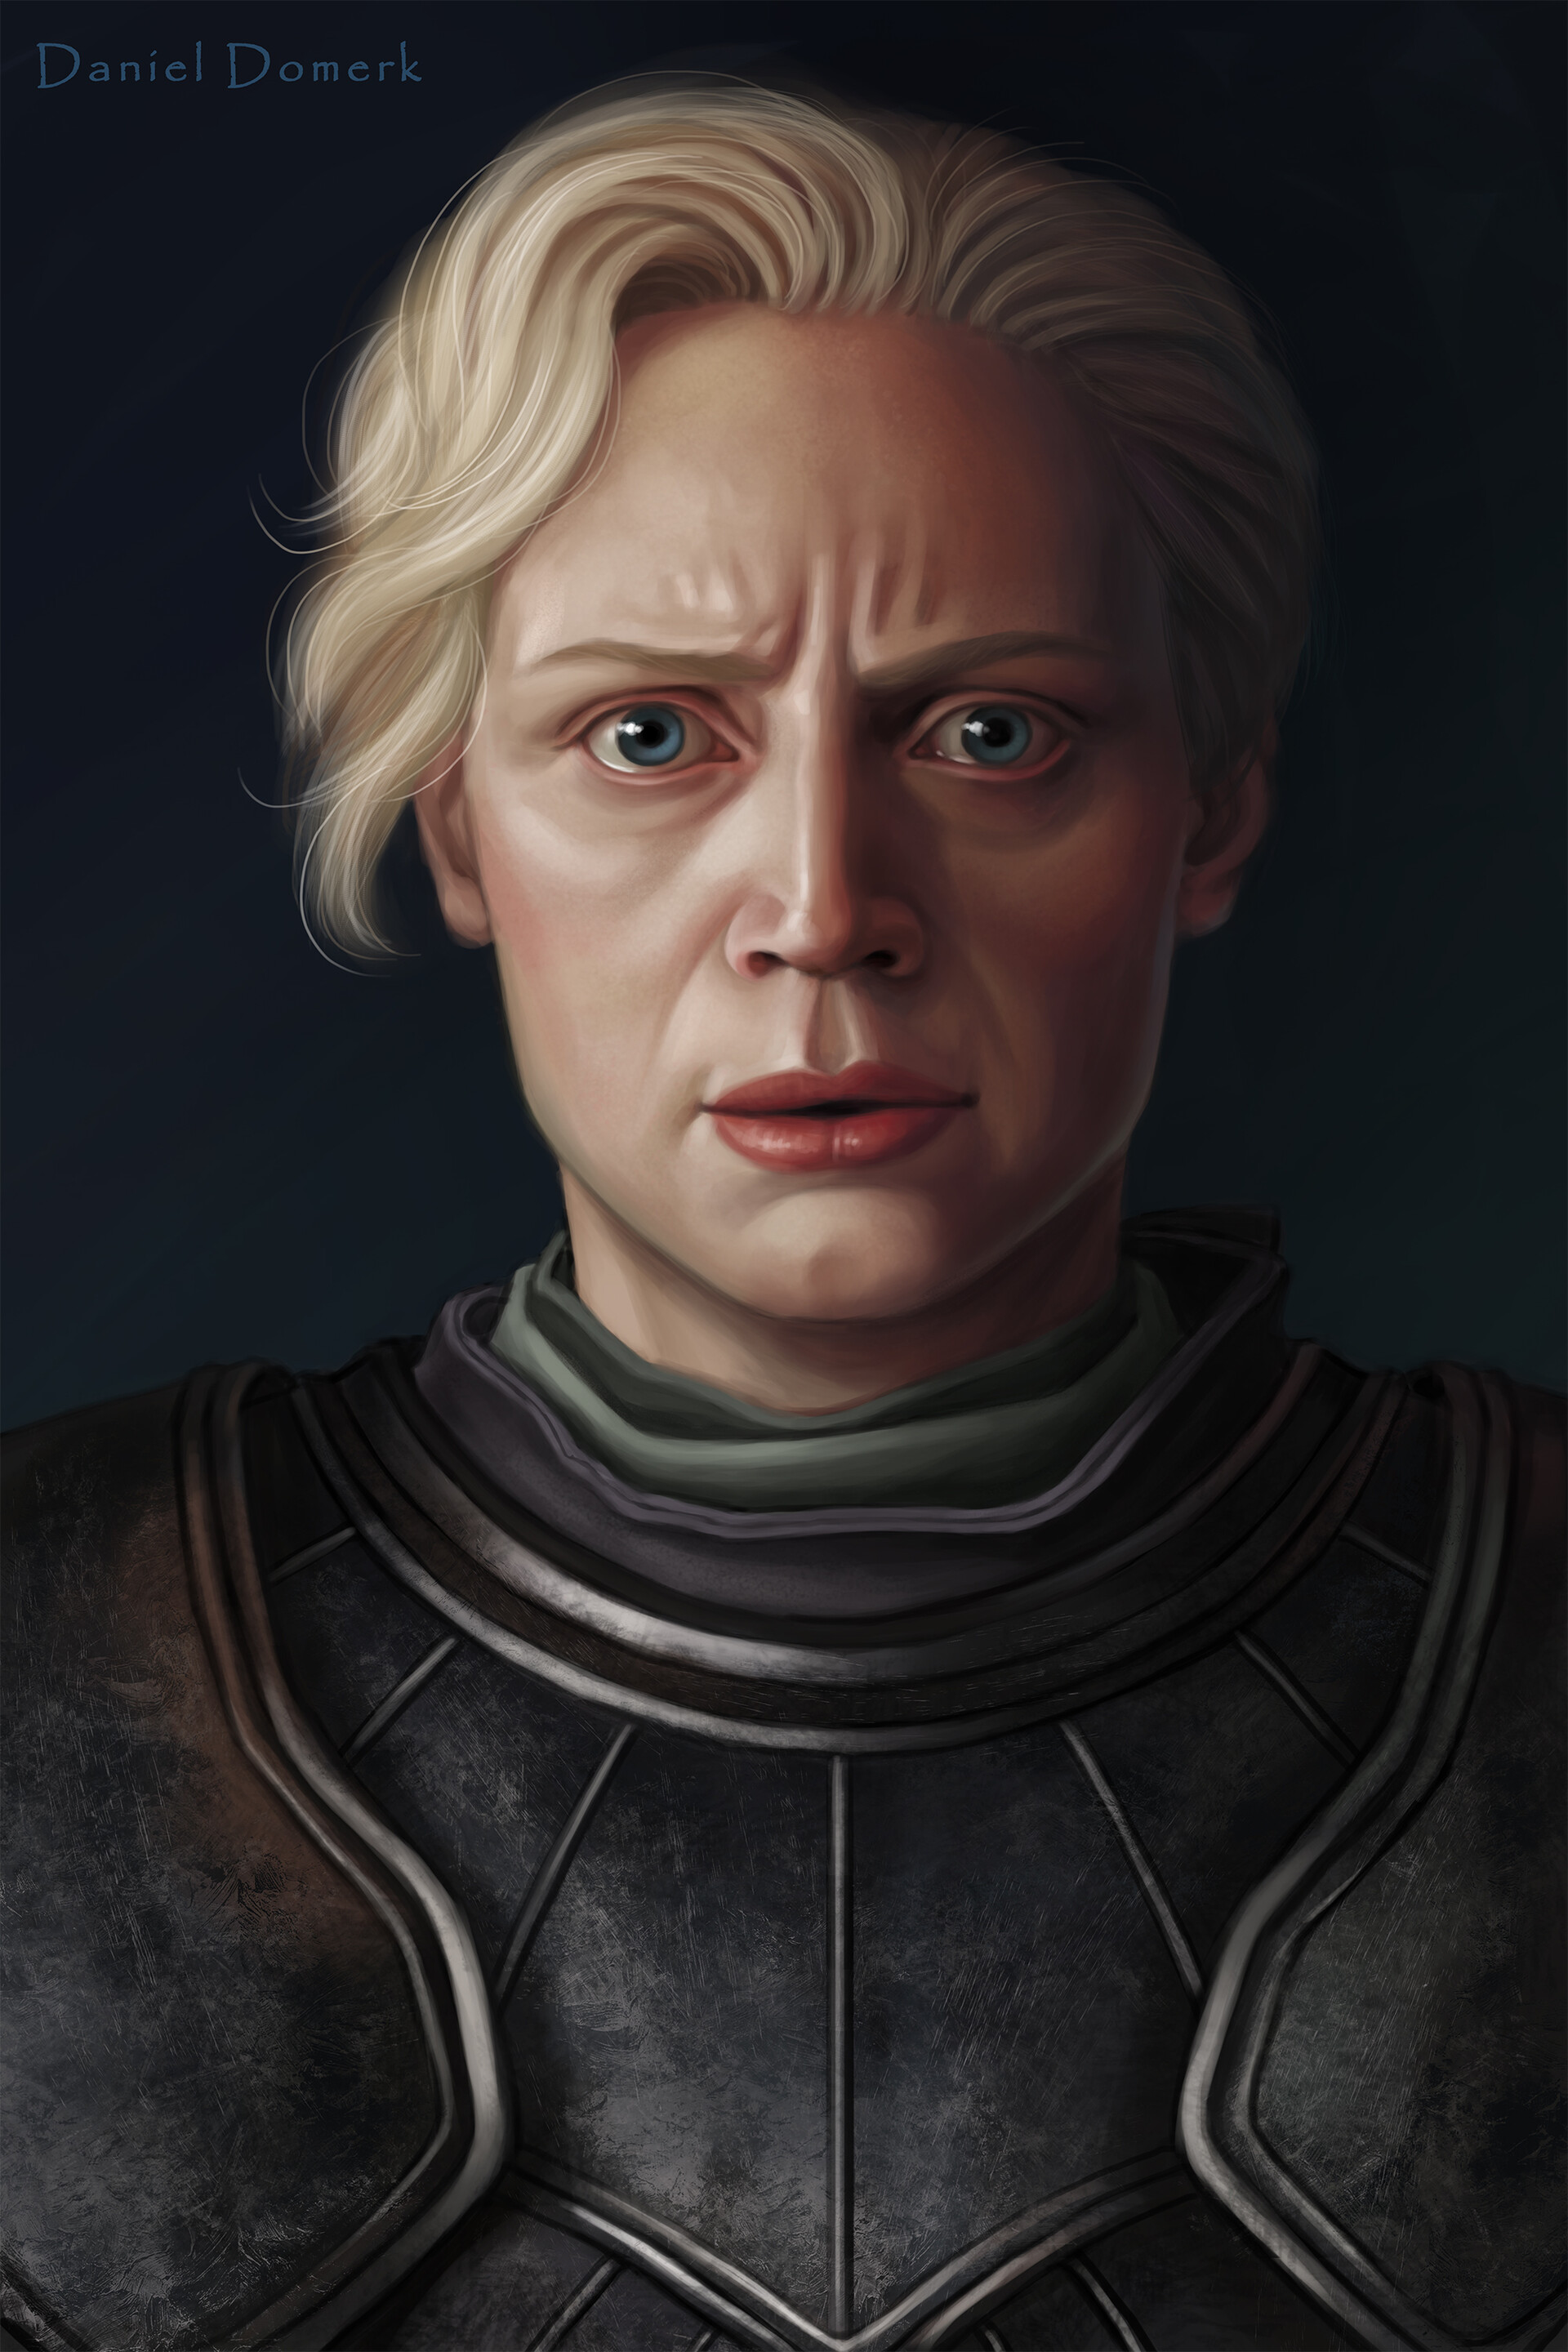 Game of Thrones: Brienne of Tarth Artwork for the Six Fanarts challenge.